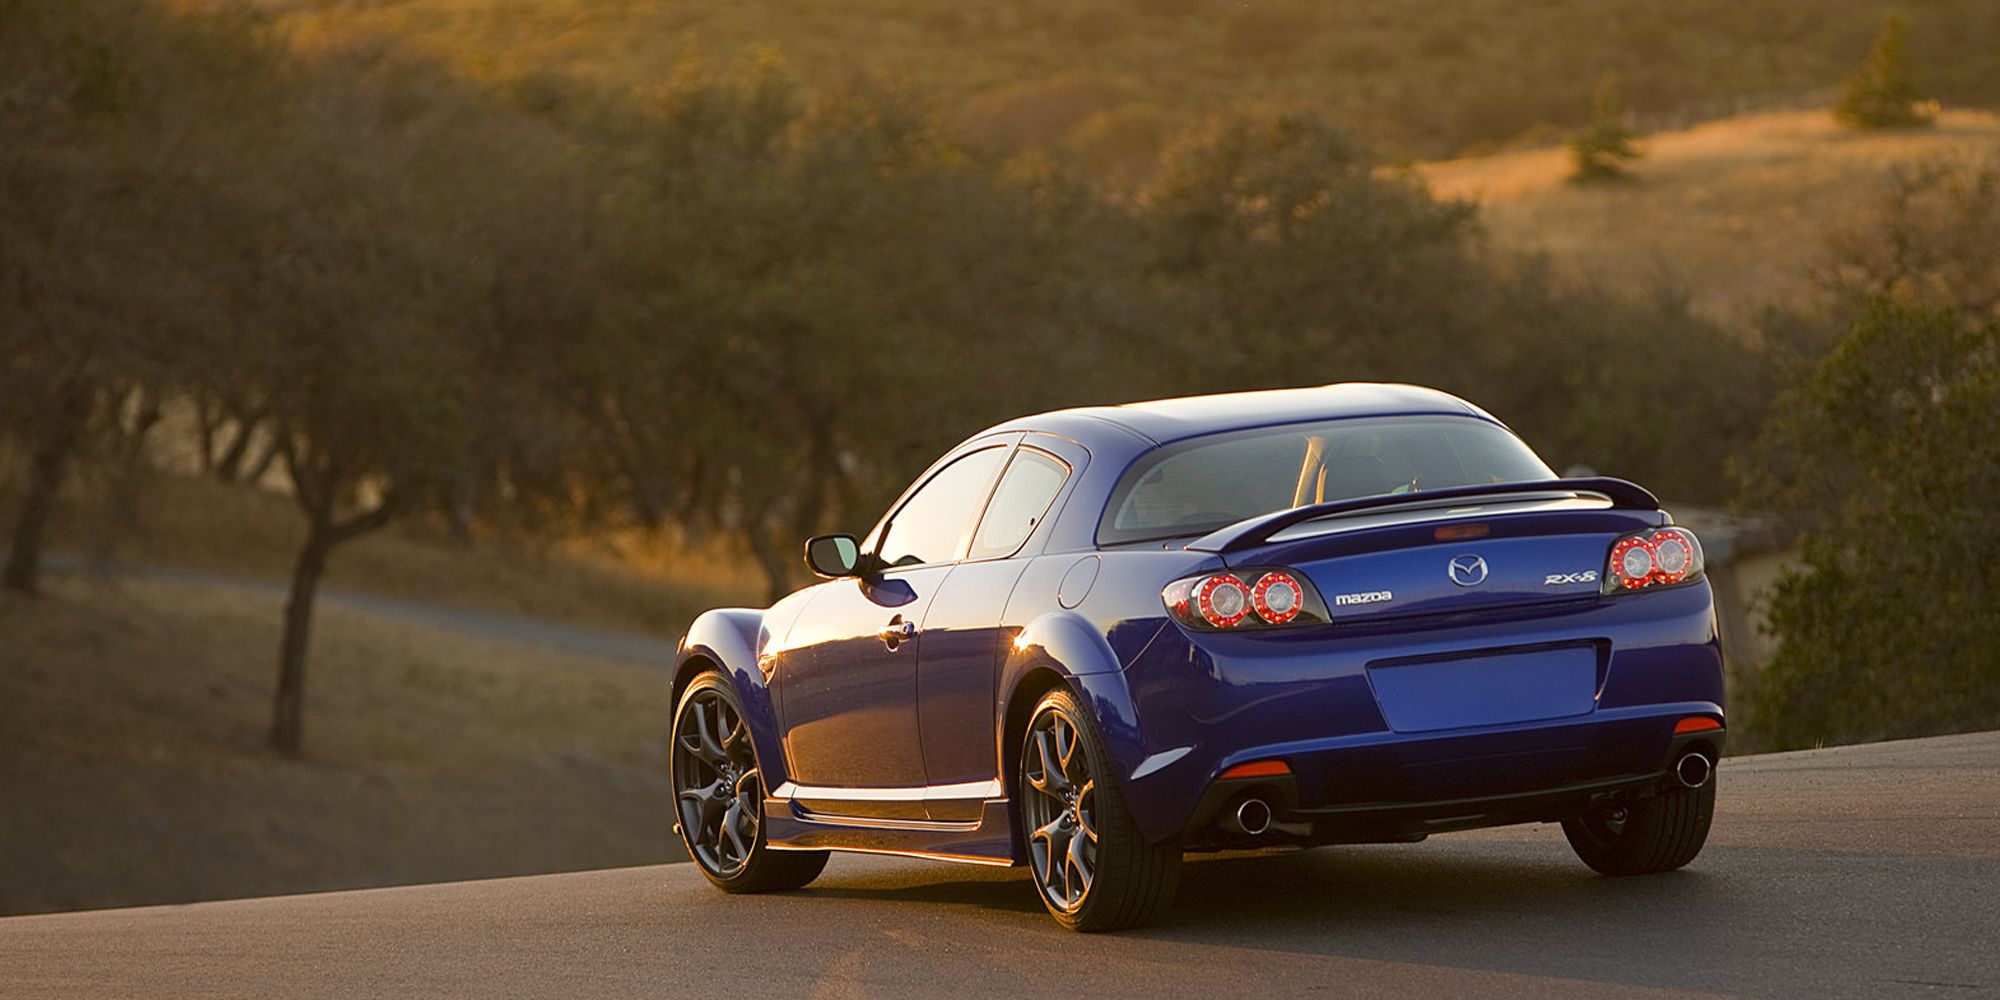 Rear 3/4 view of a blue Mazda RX-8 in the sunset